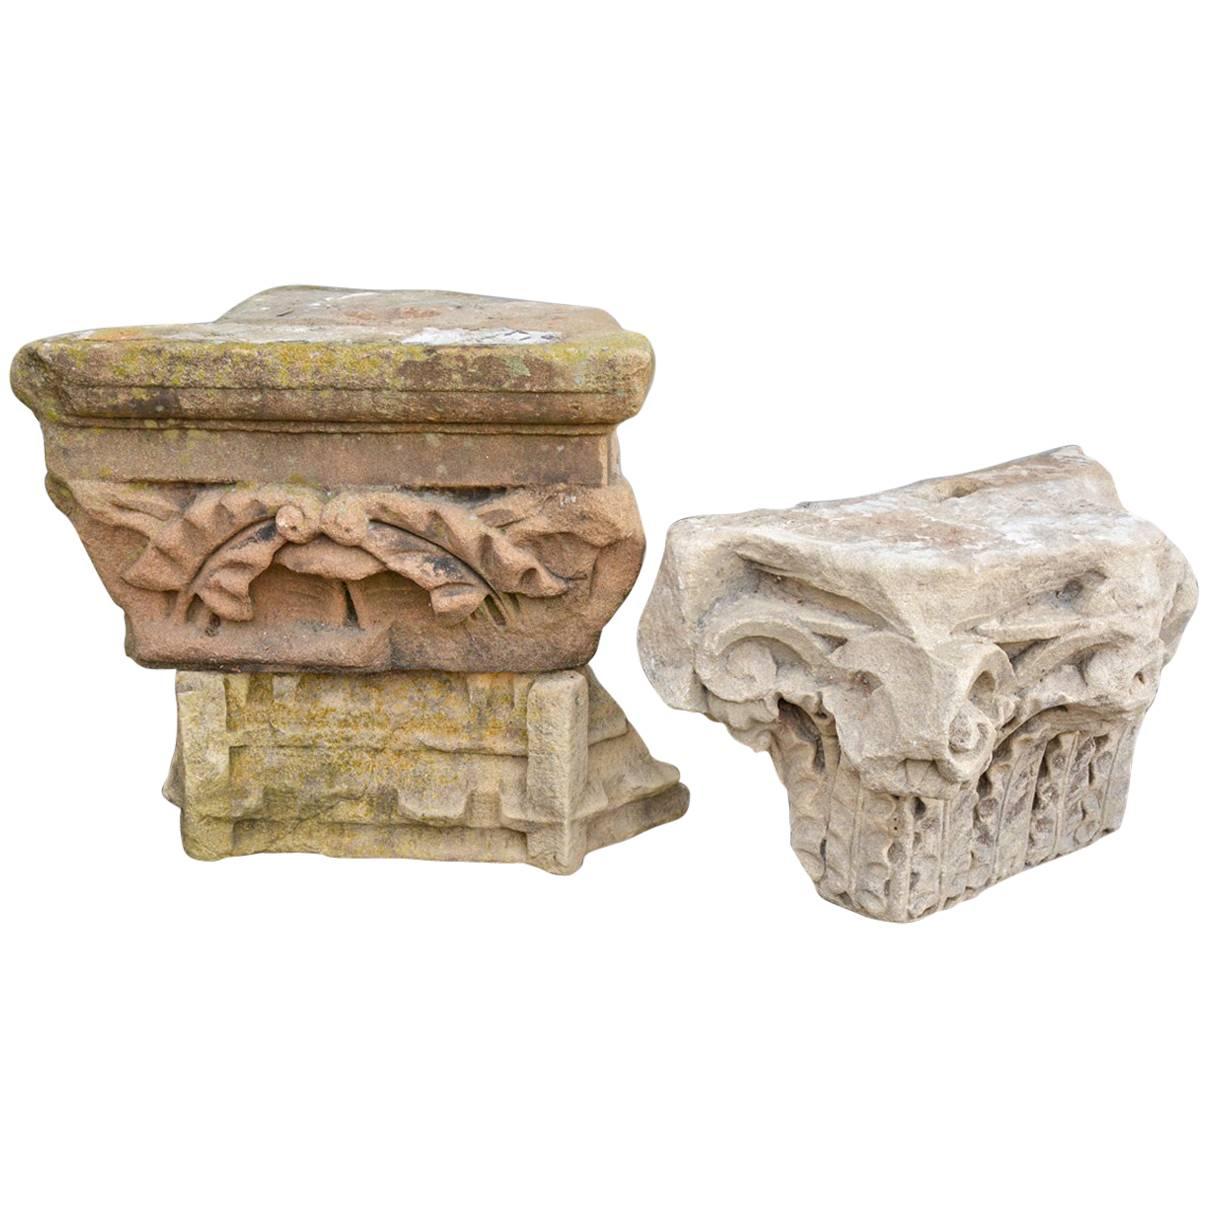 Two Early Architectural Stone Capital